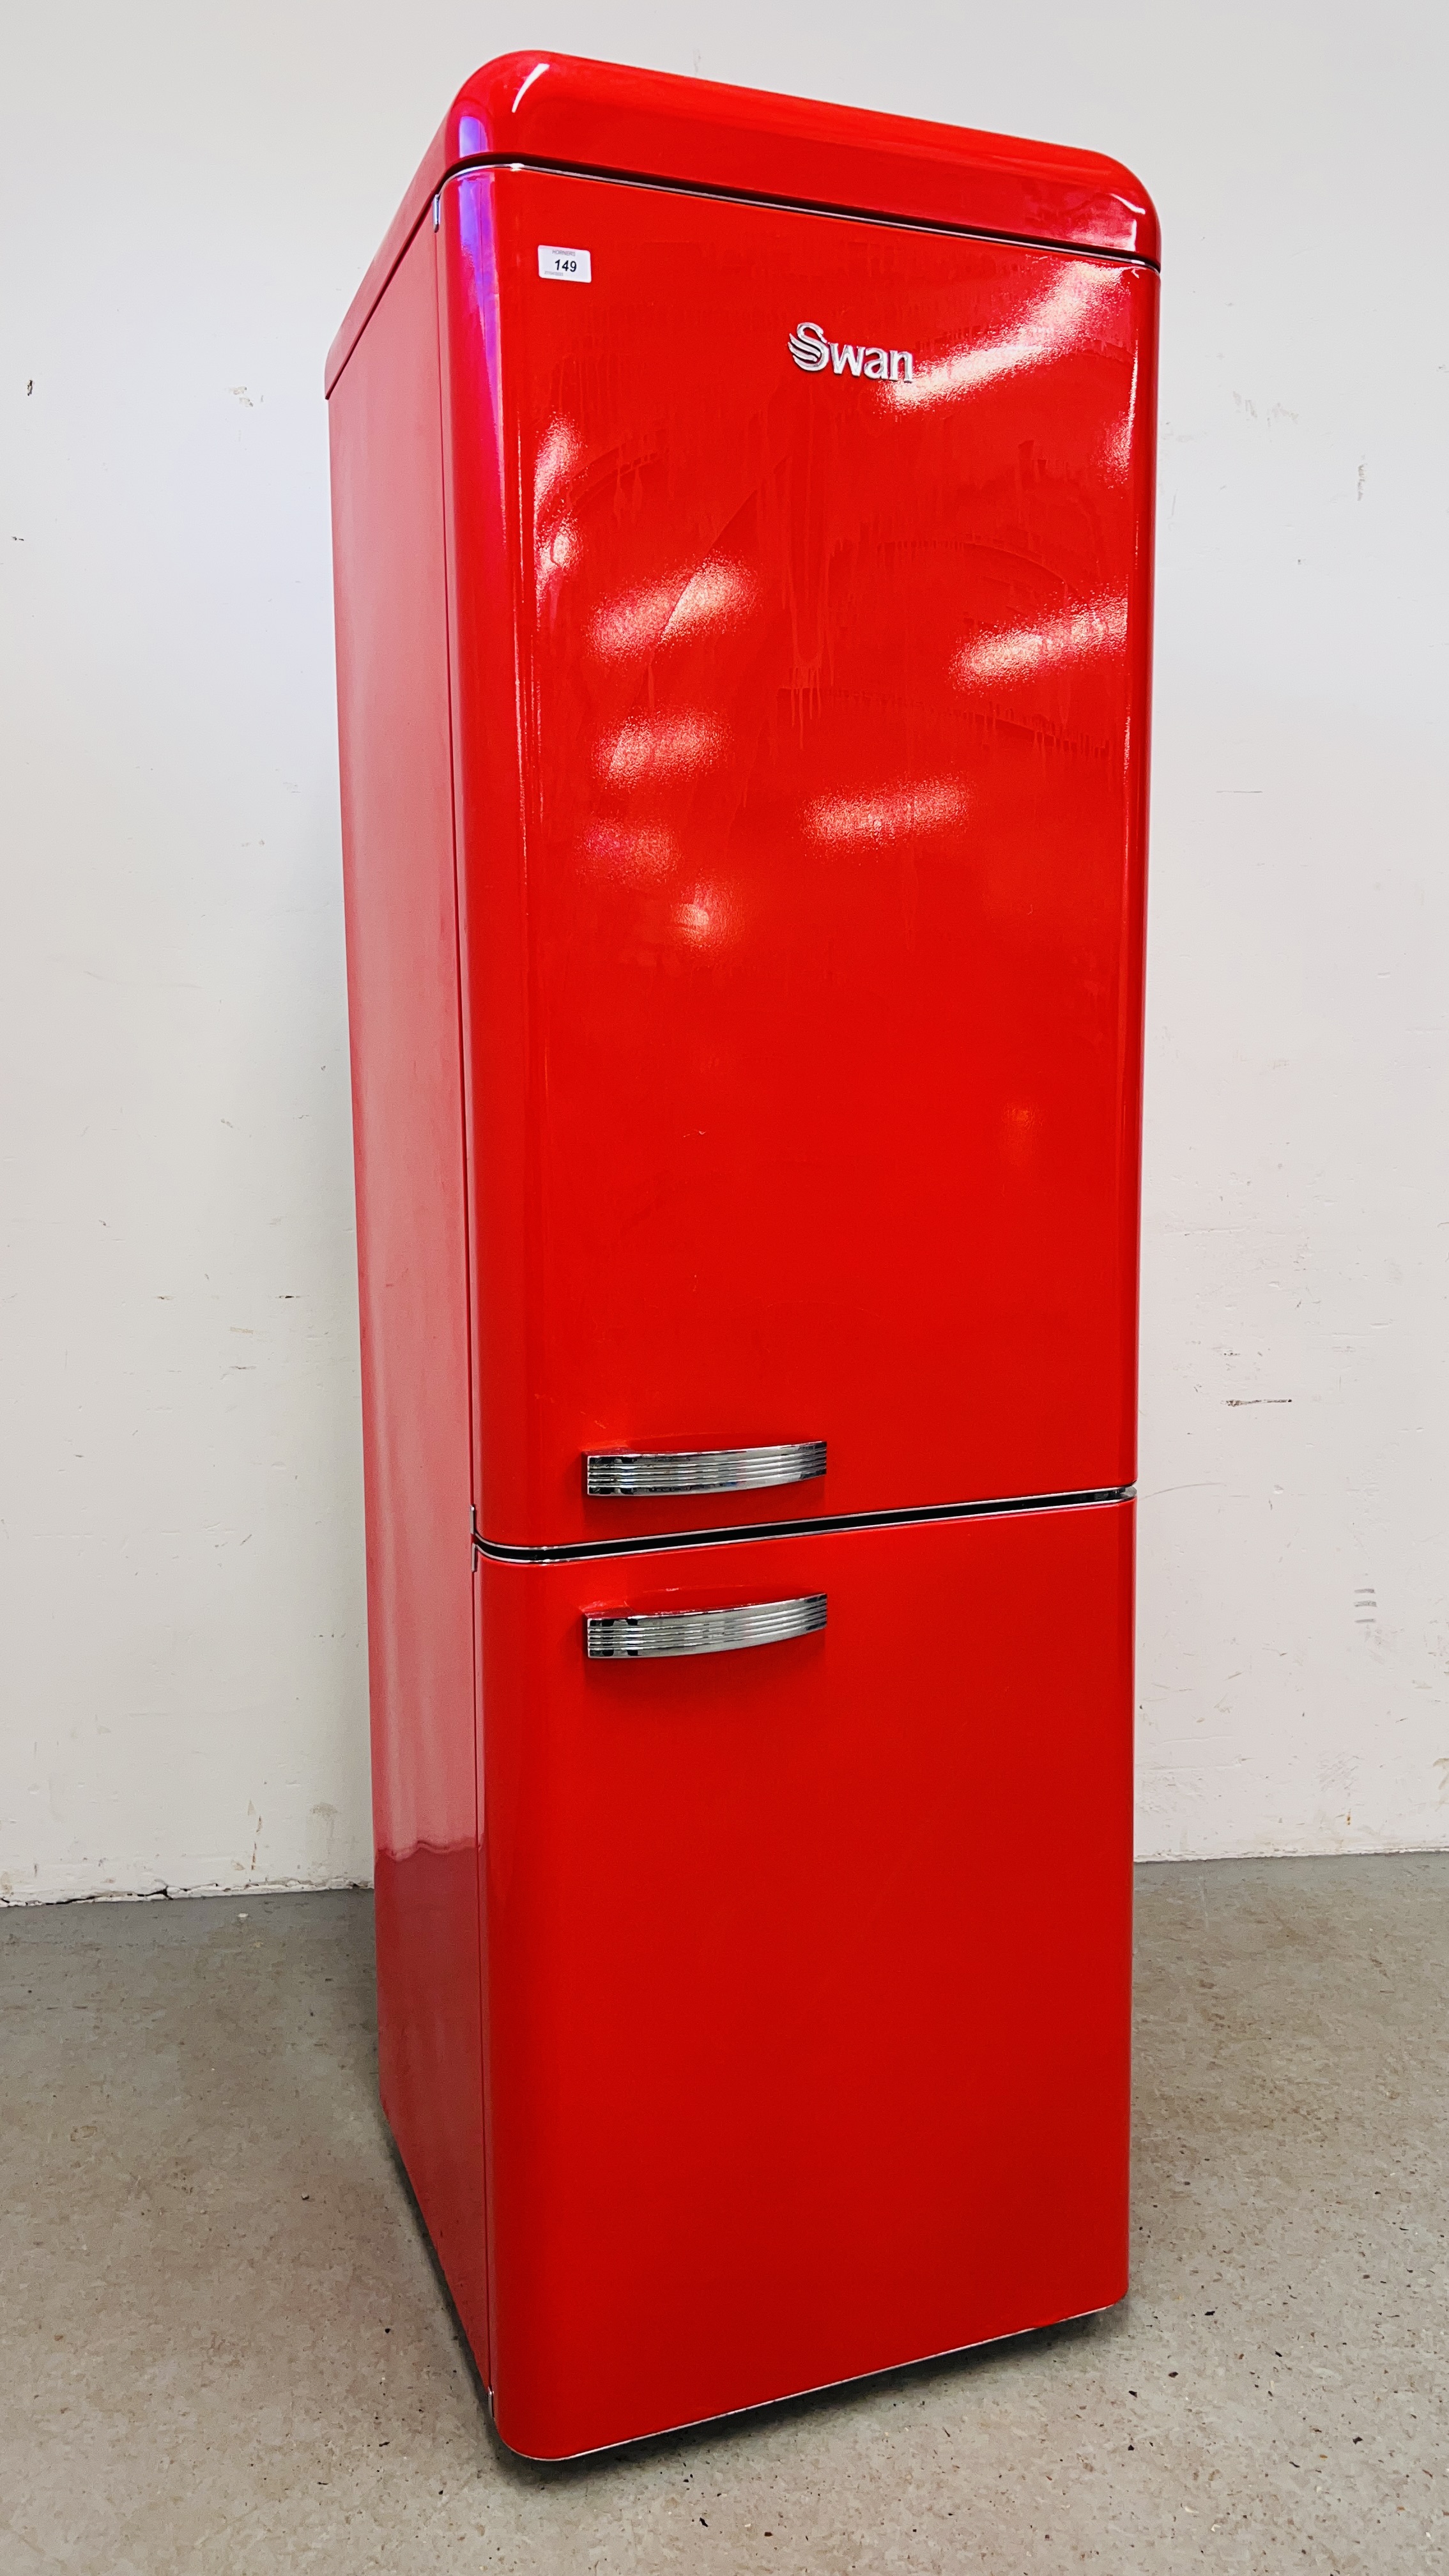 A SWAN RETRO STYLE RED FINISH FRIDGE FREEZER - SOLD AS SEEN.